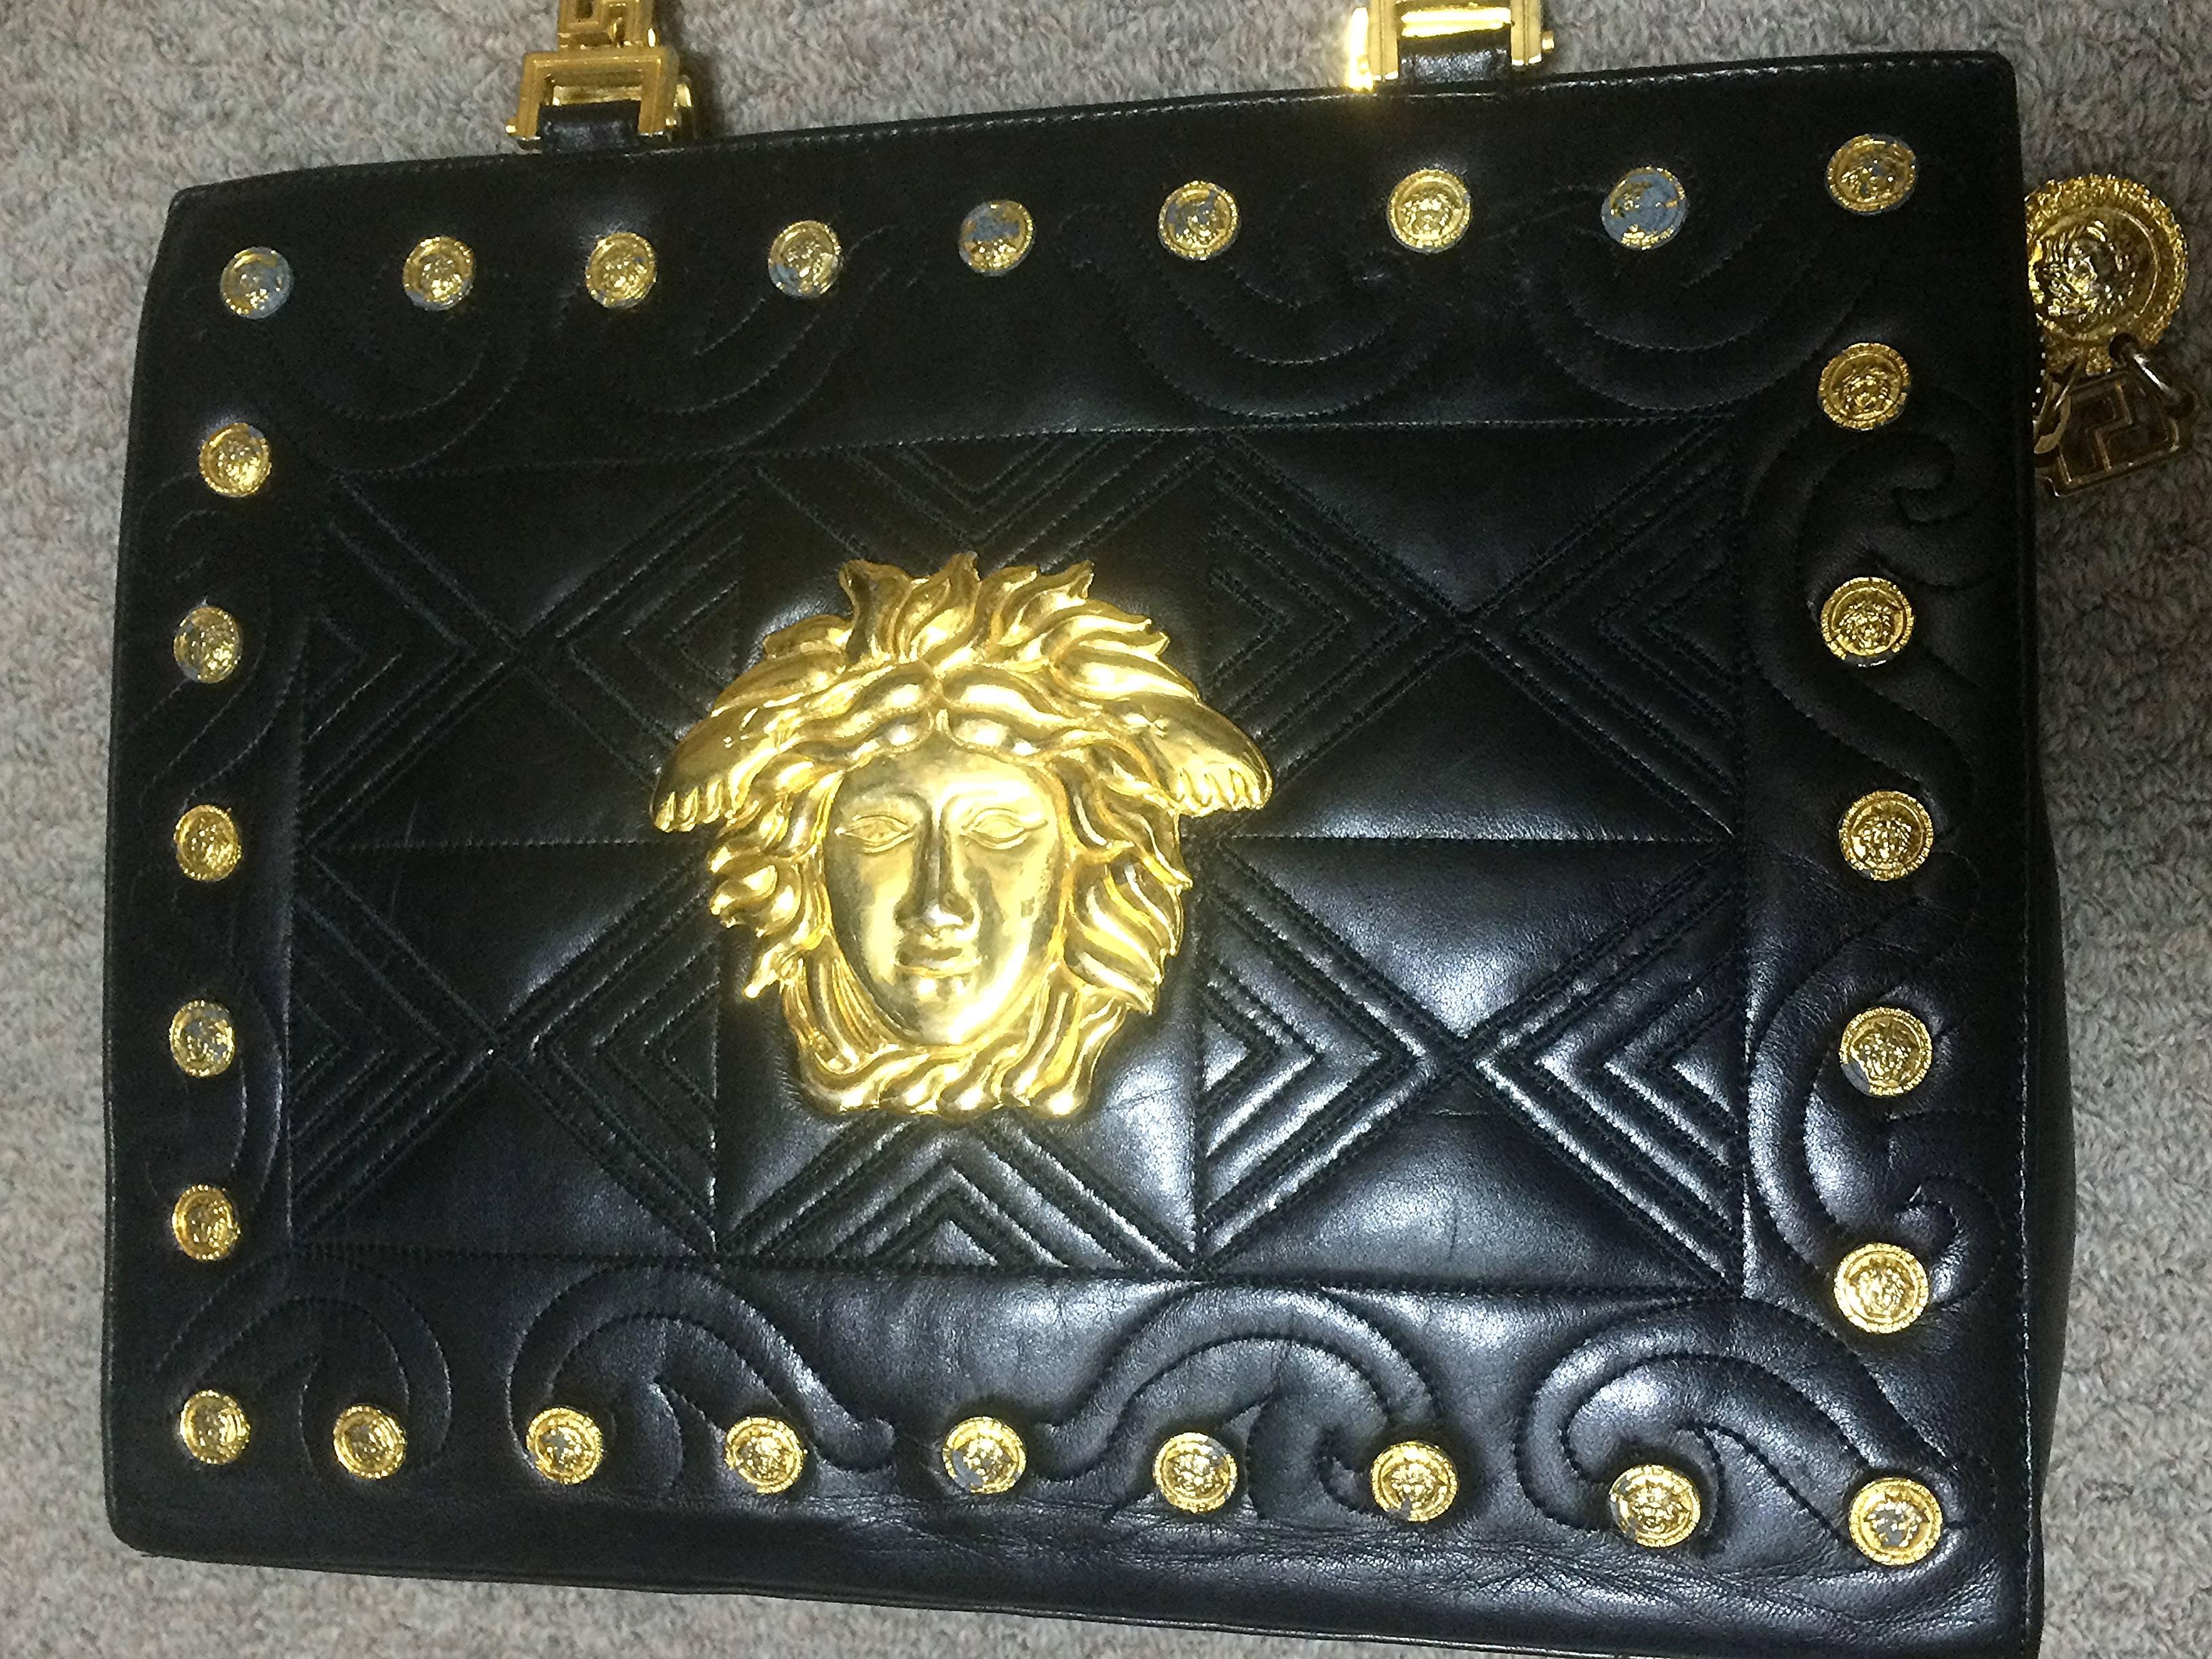 1990s. Vintage Gianni Versace black leather tote bag with big golden medusa charms, and gold tone hardwares. Too Gorgeous like Lady Gaga.

This is one sophisticated and RARE masterpiece from GIANNI VERSACE in the old era. 
If you are looking for